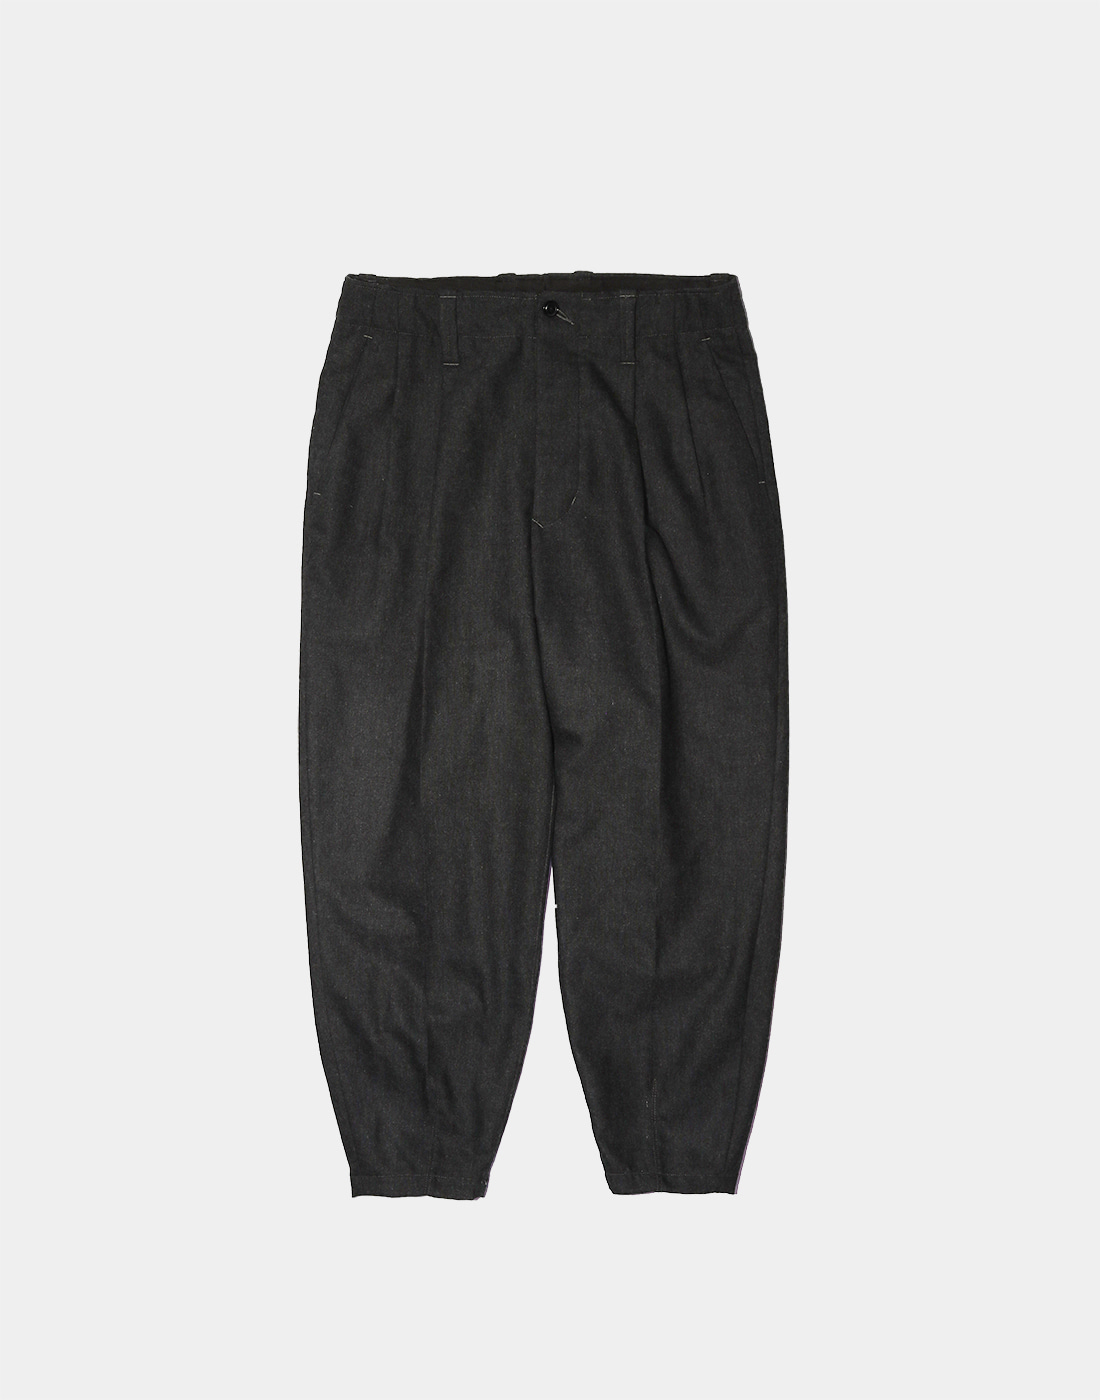 HAVERSACK W/C 2-Tuck Tapered Pants, Charcoal